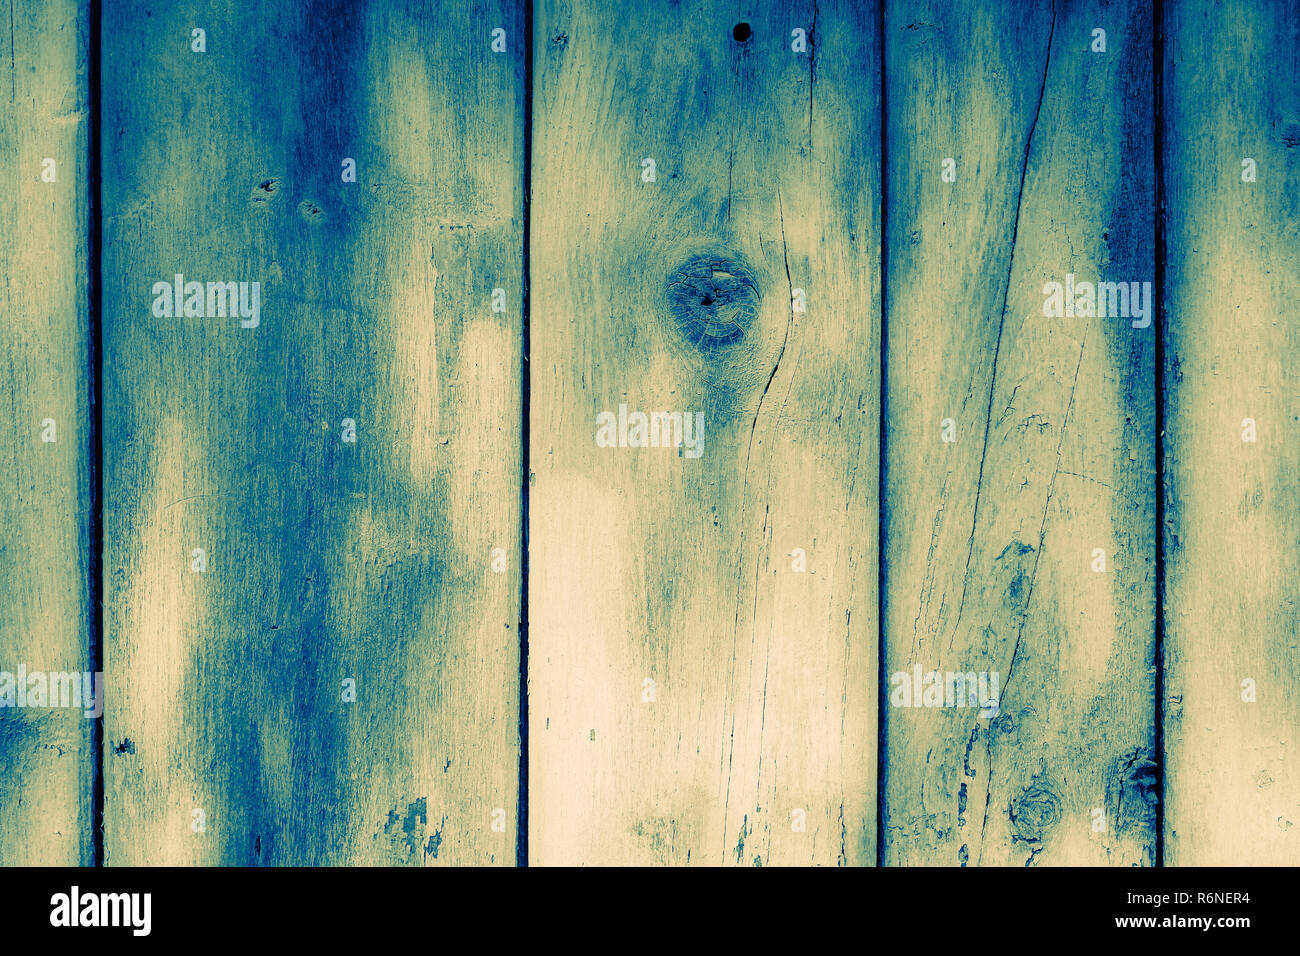 Old wooden texture useful like vintage background Stock Photo